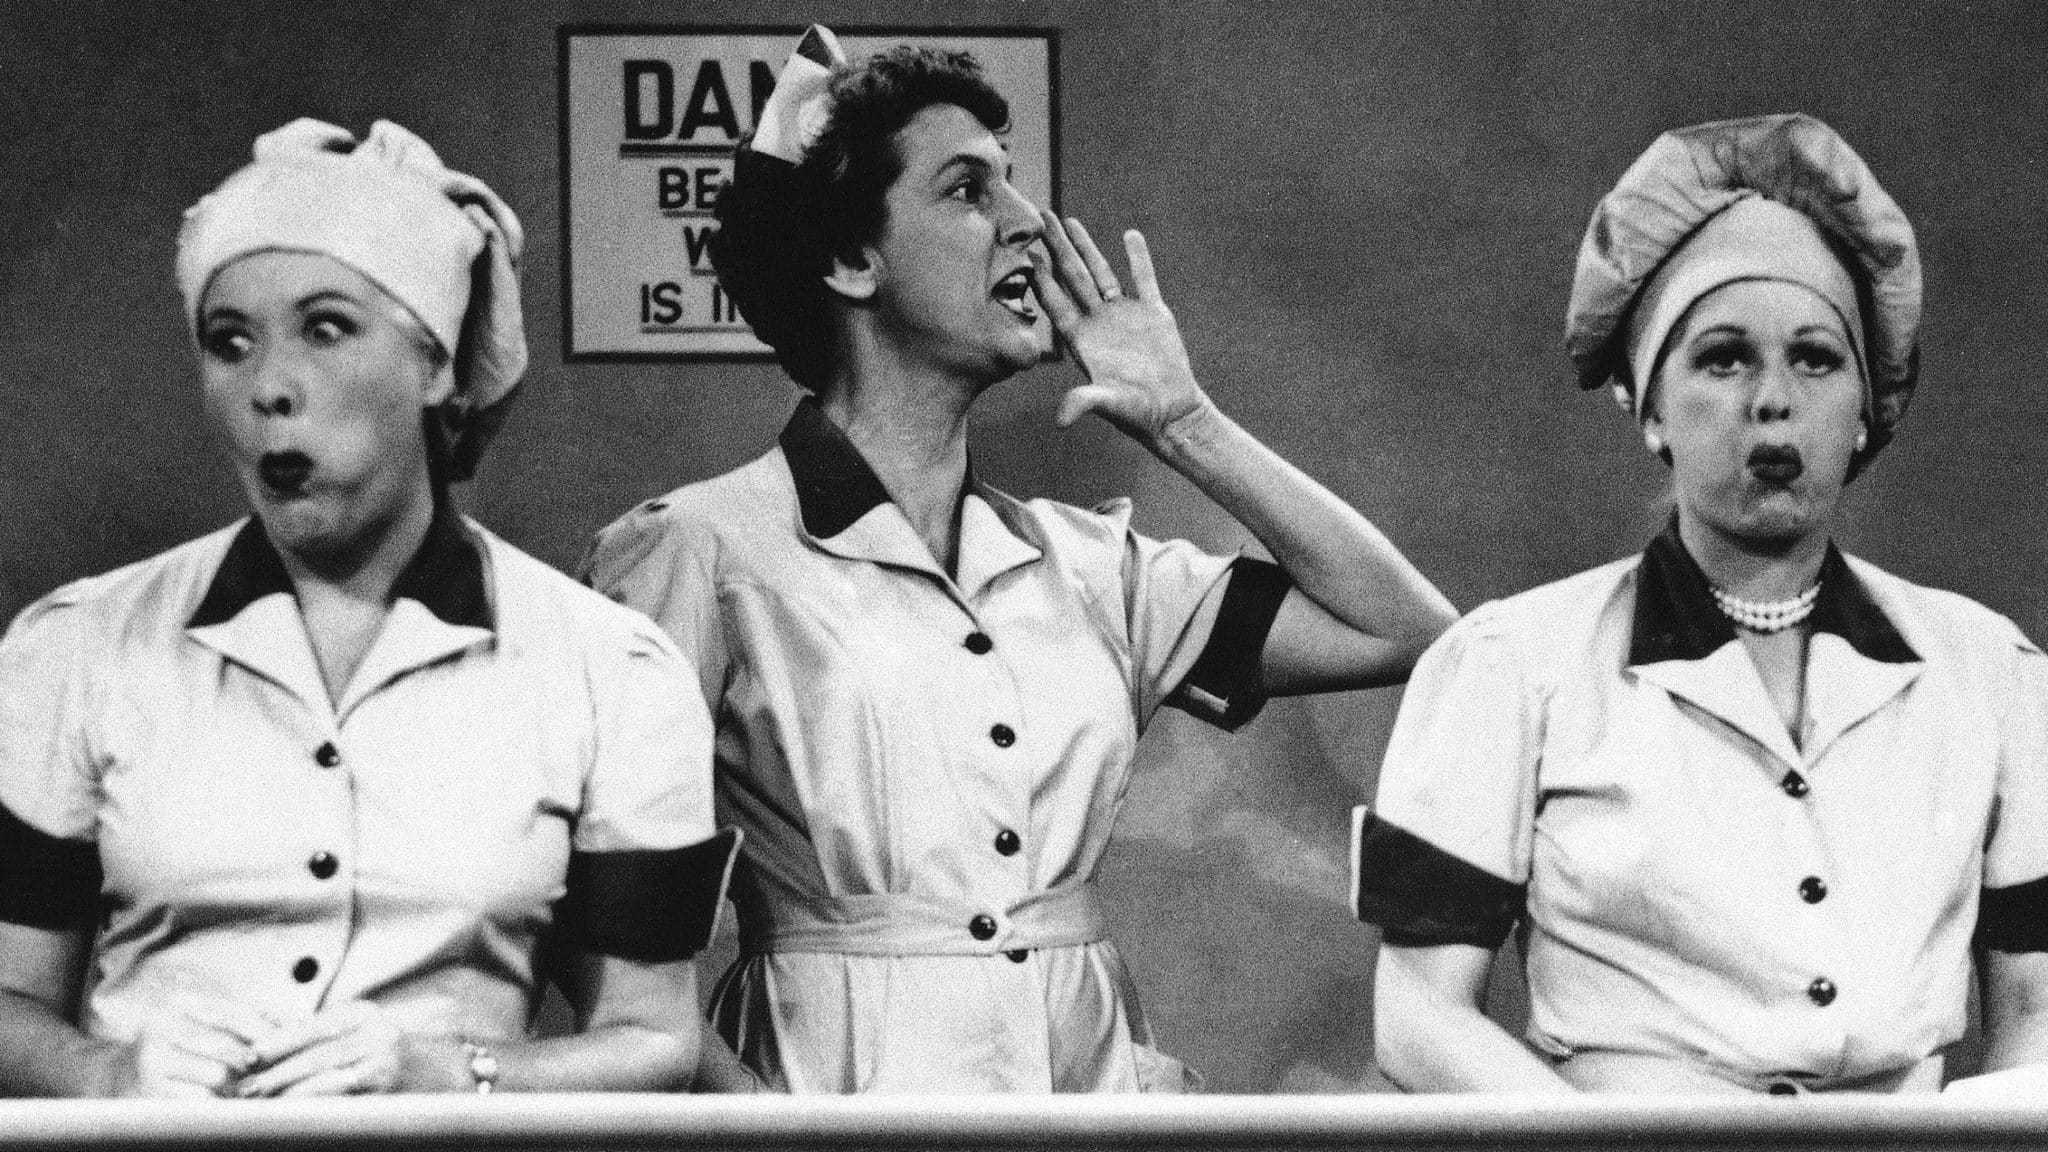 Vivian Vance and Lucille Ball ham it up at the chocolate factory in a famous food-centric episode of "I Love Lucy."